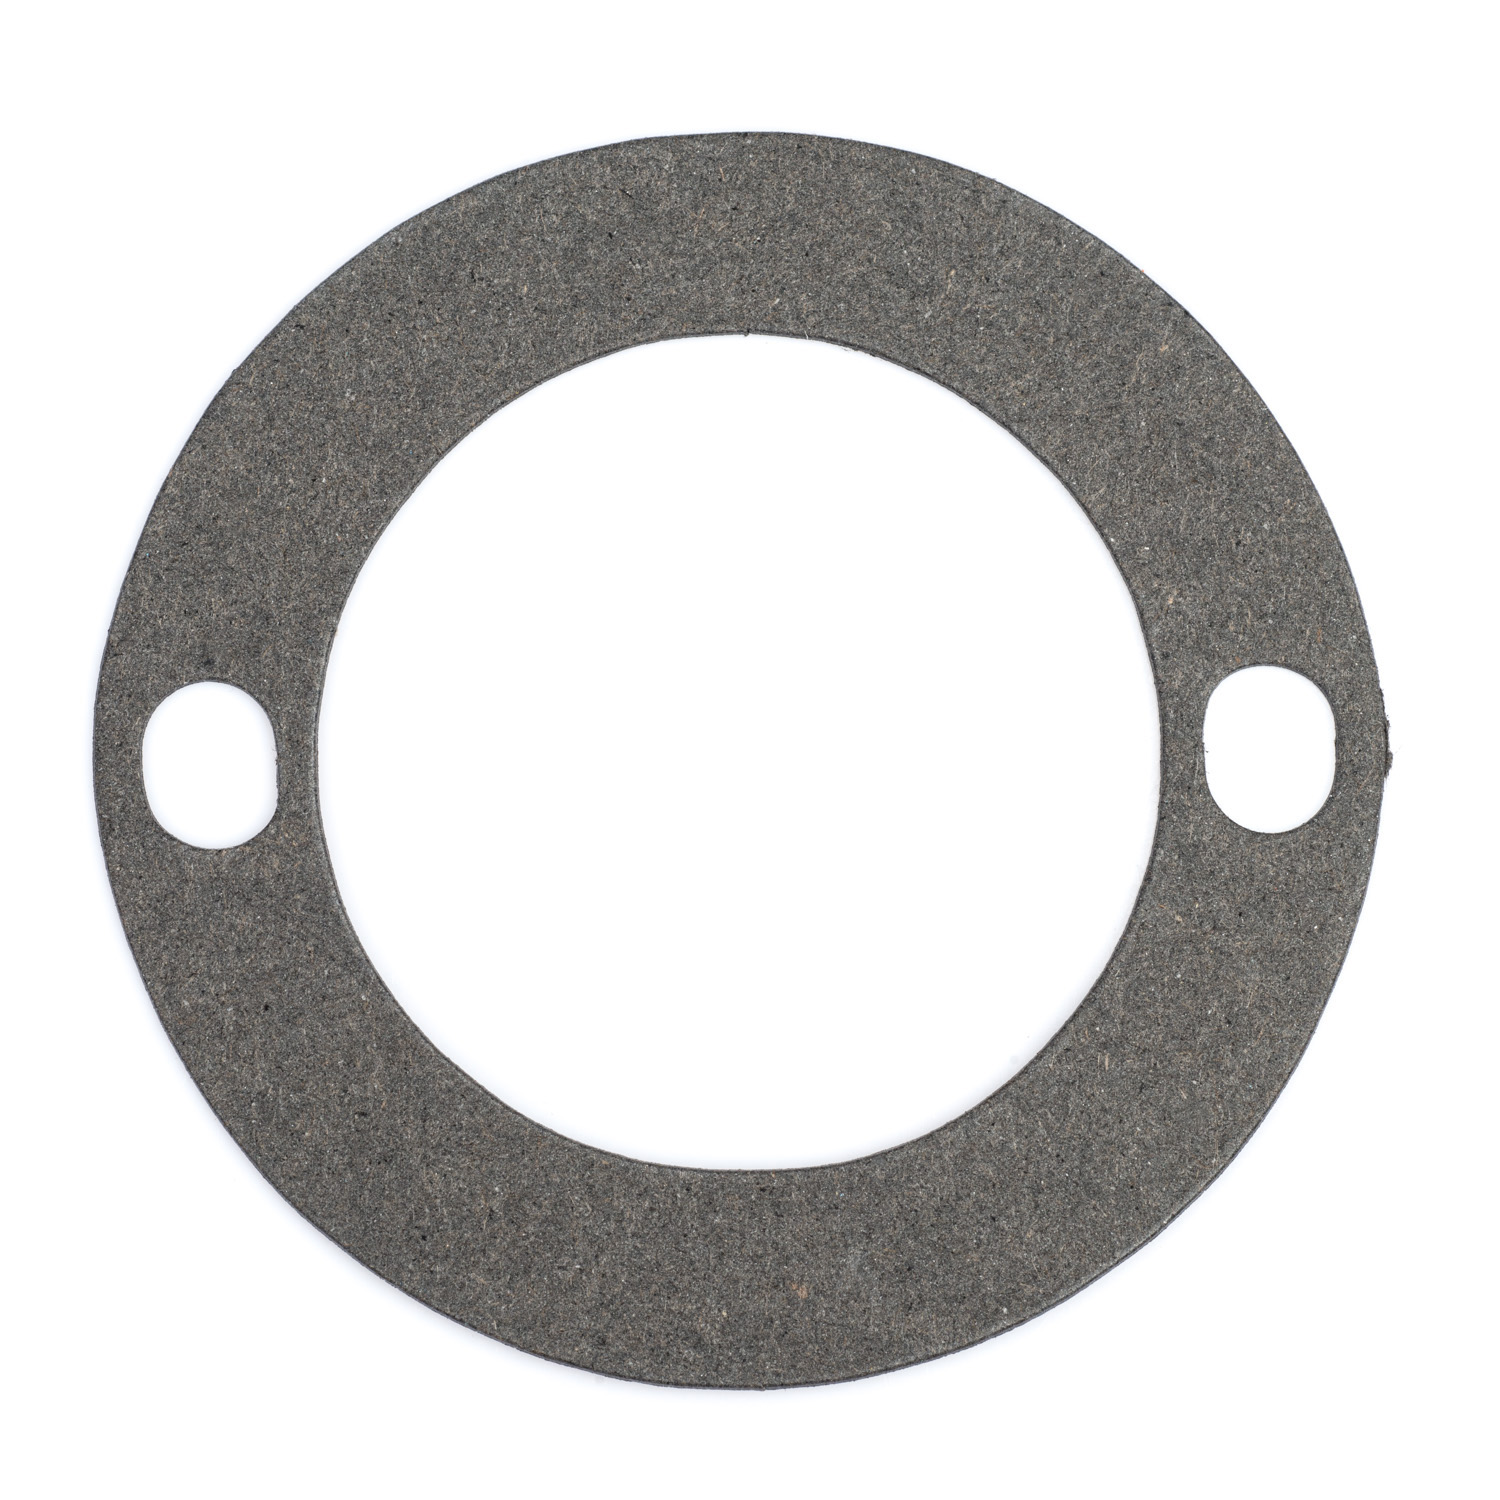 XS650 Oil Filter Strainer Cover Gasket